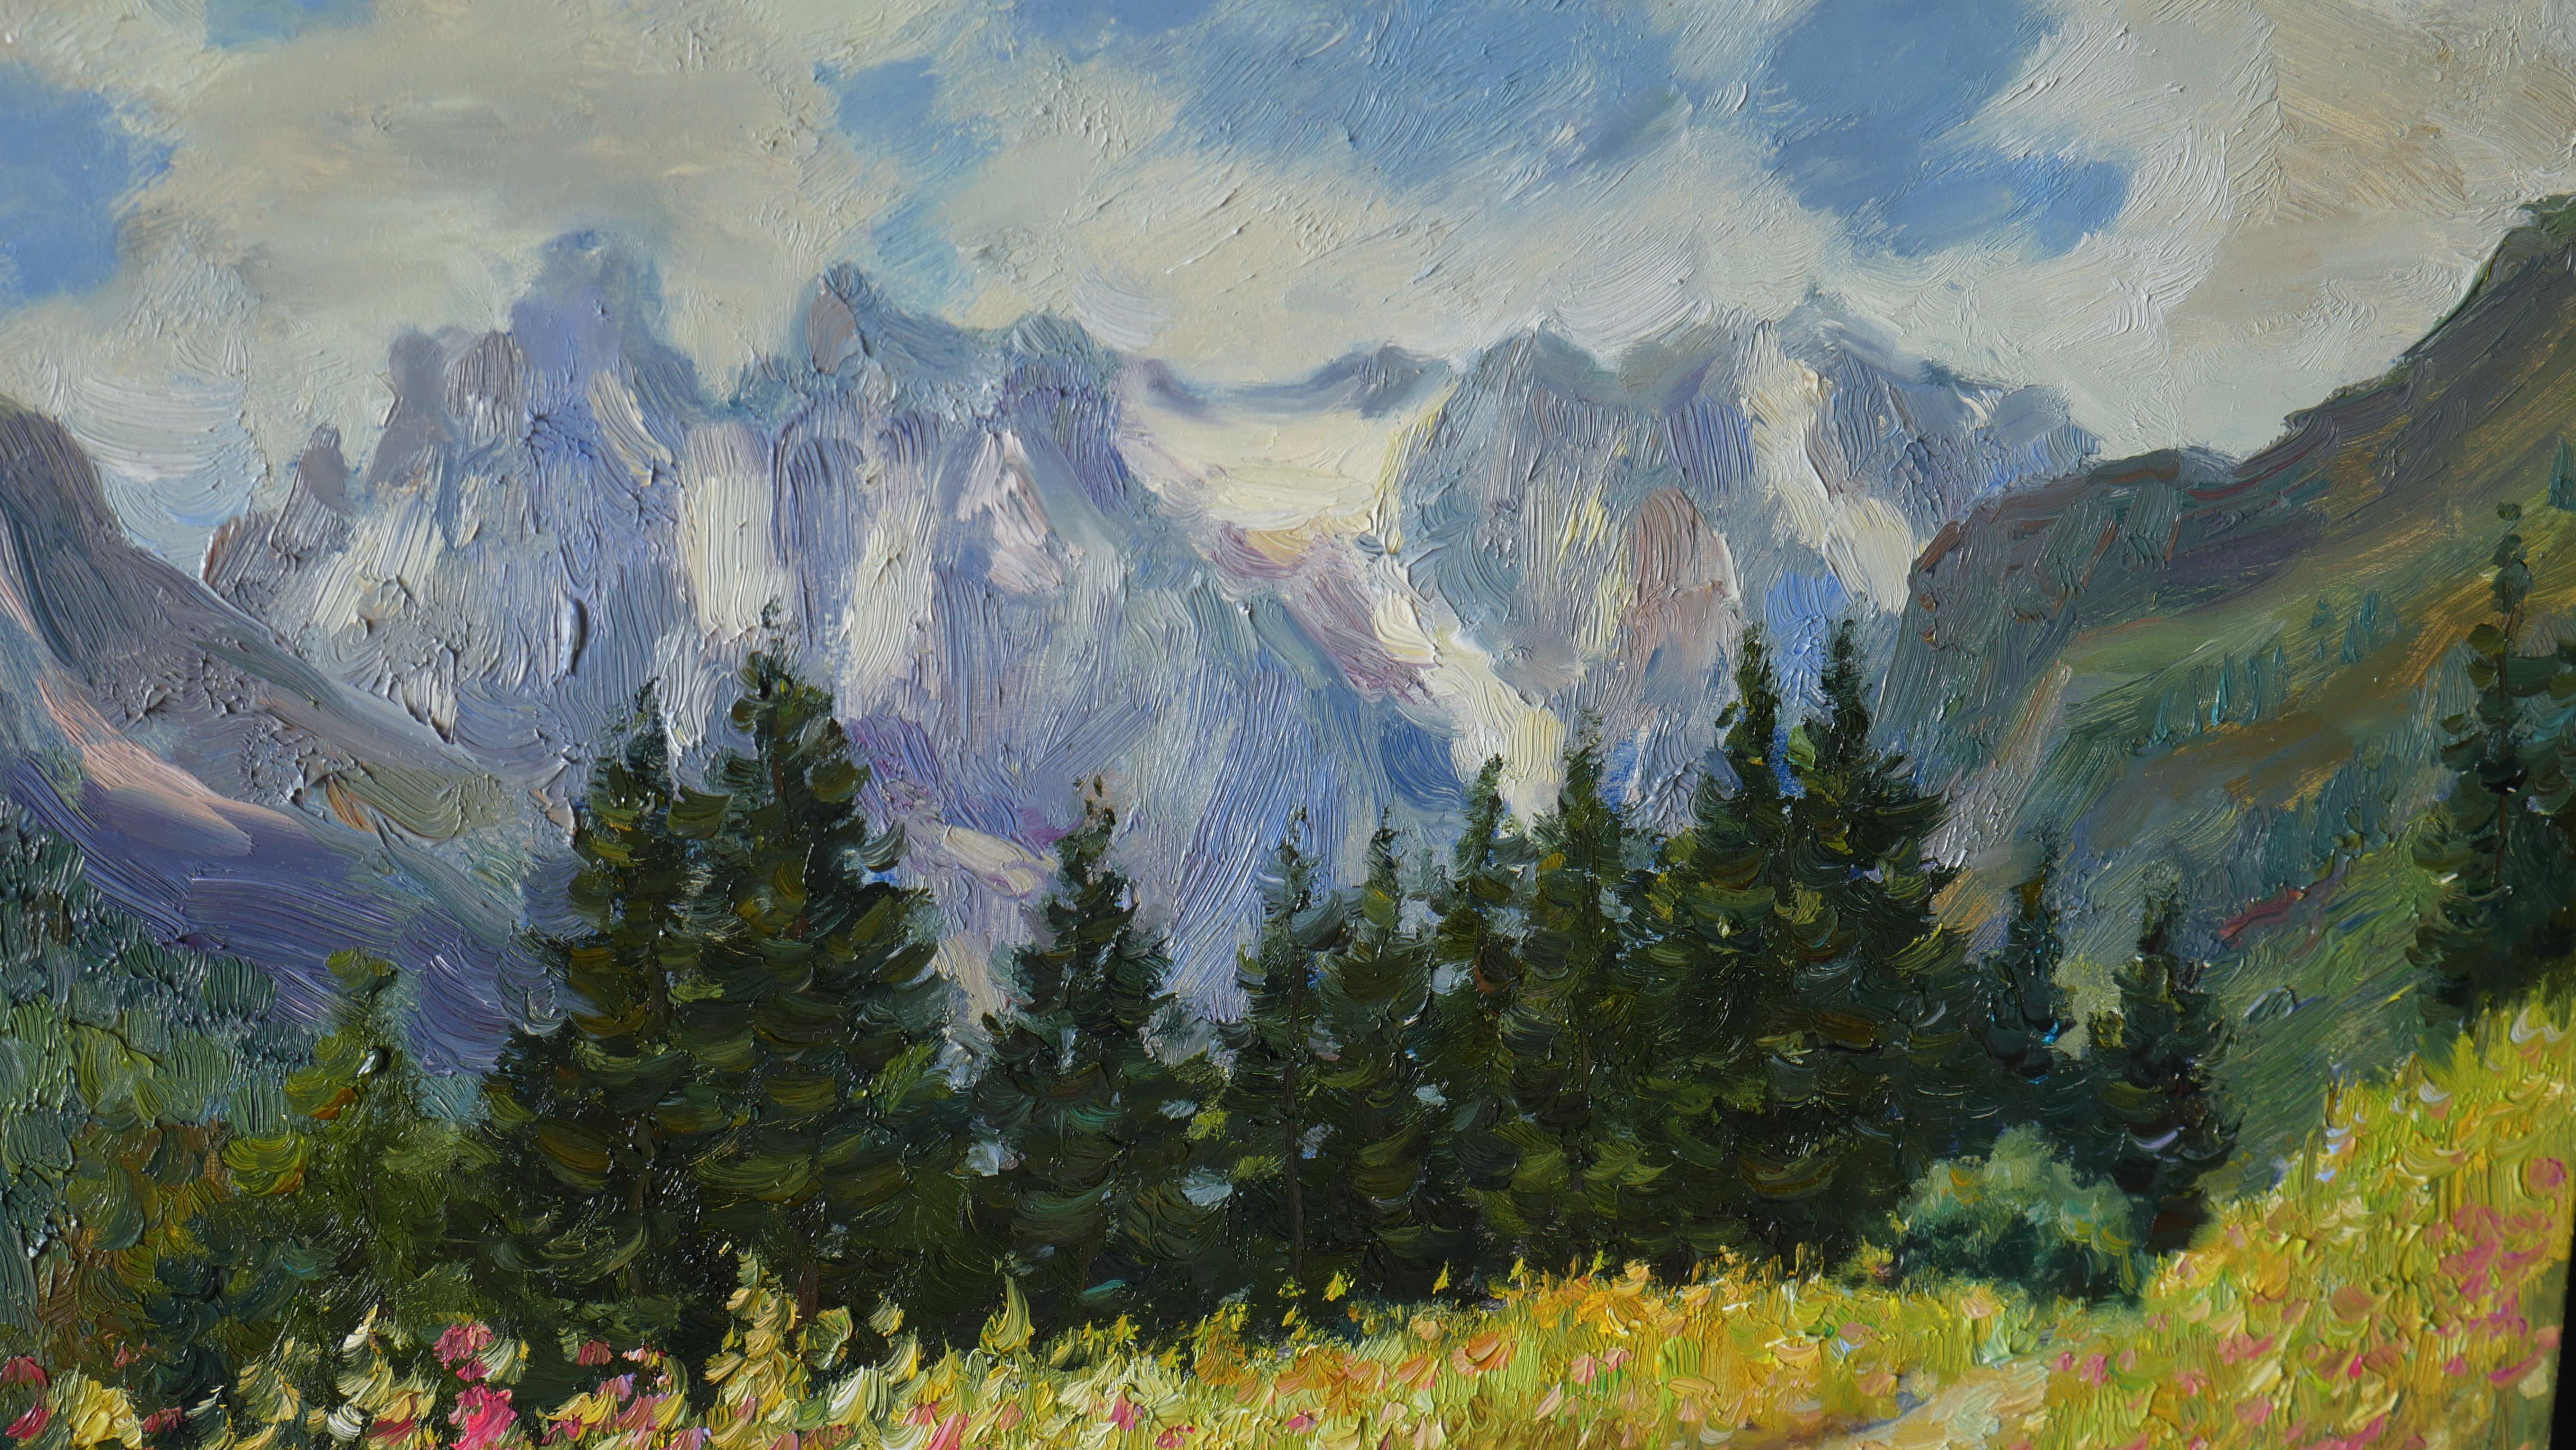 The sunny summer painting with mountains is a beautiful wall decor, the painting is created en plein air, the artwork is full of different bright colours, combinations of warm and cold shades are professionally captured by the artist. The lively